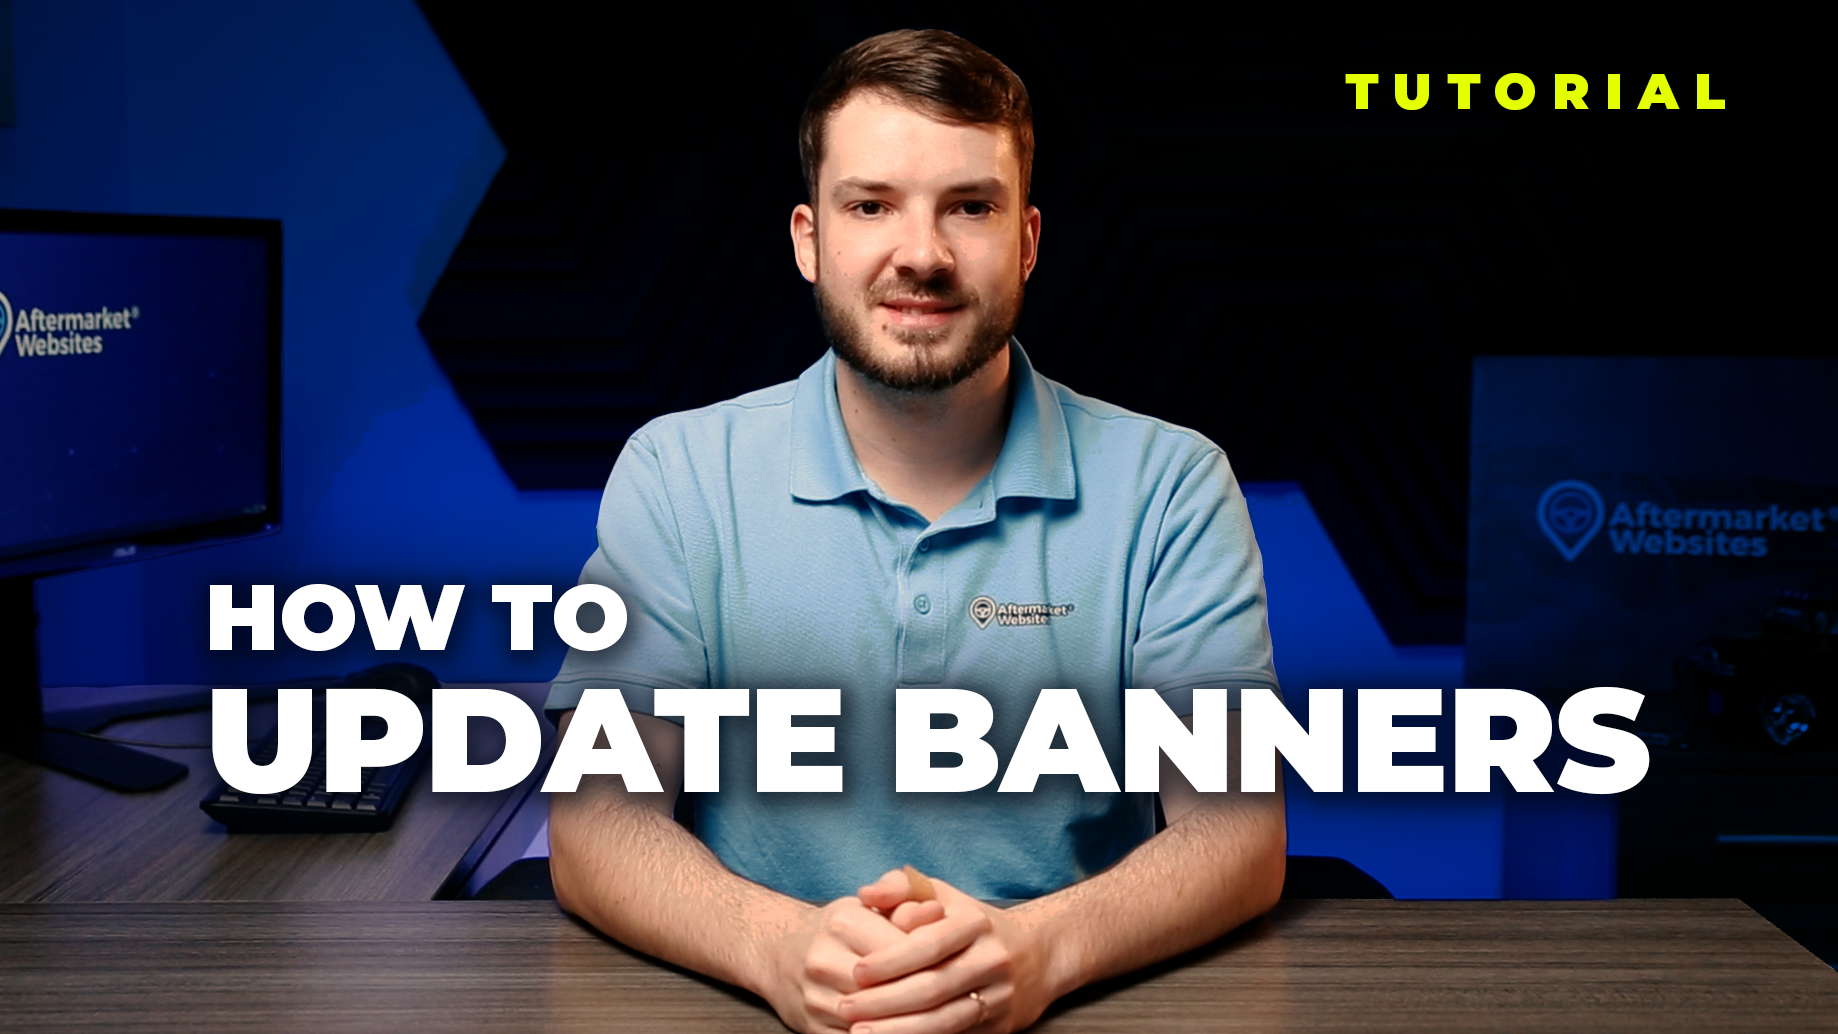 How to Update Your Banners